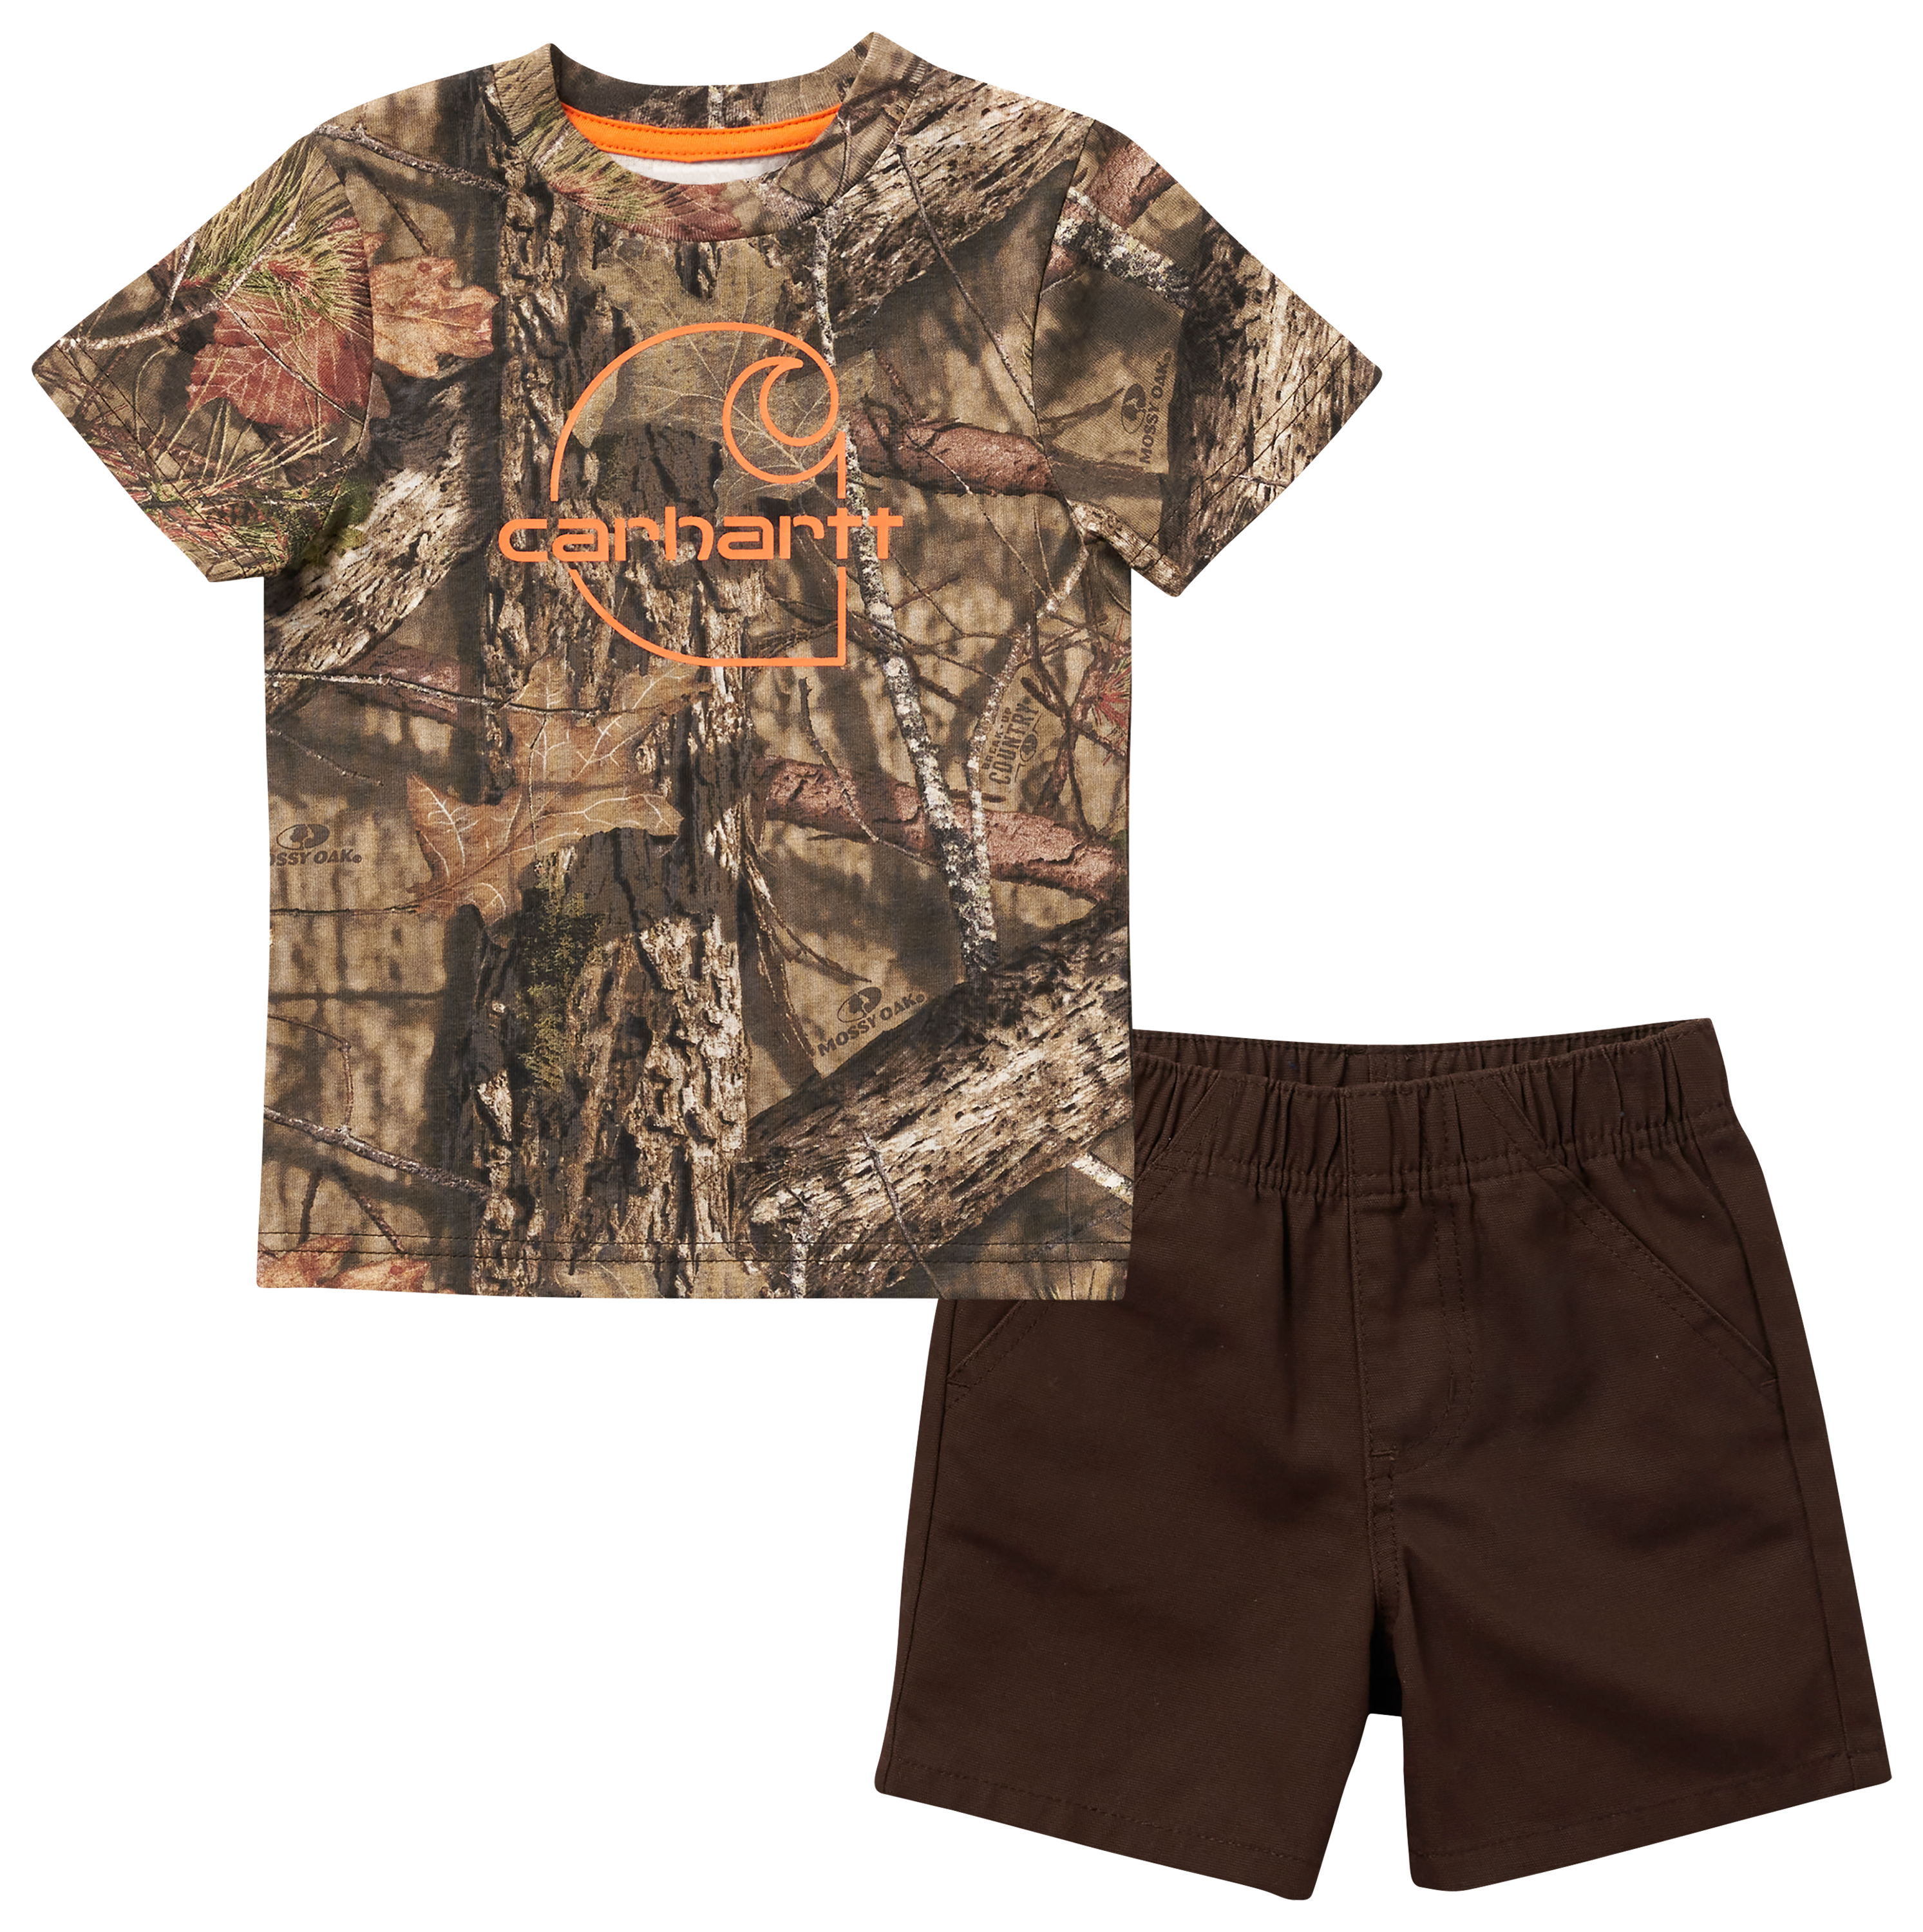 Carhartt Camo Short Sleeve T Shirt and Canvas Shorts Set for Baby Boys Mustang Brown/Mossy Oak Break Up Country 12 Months